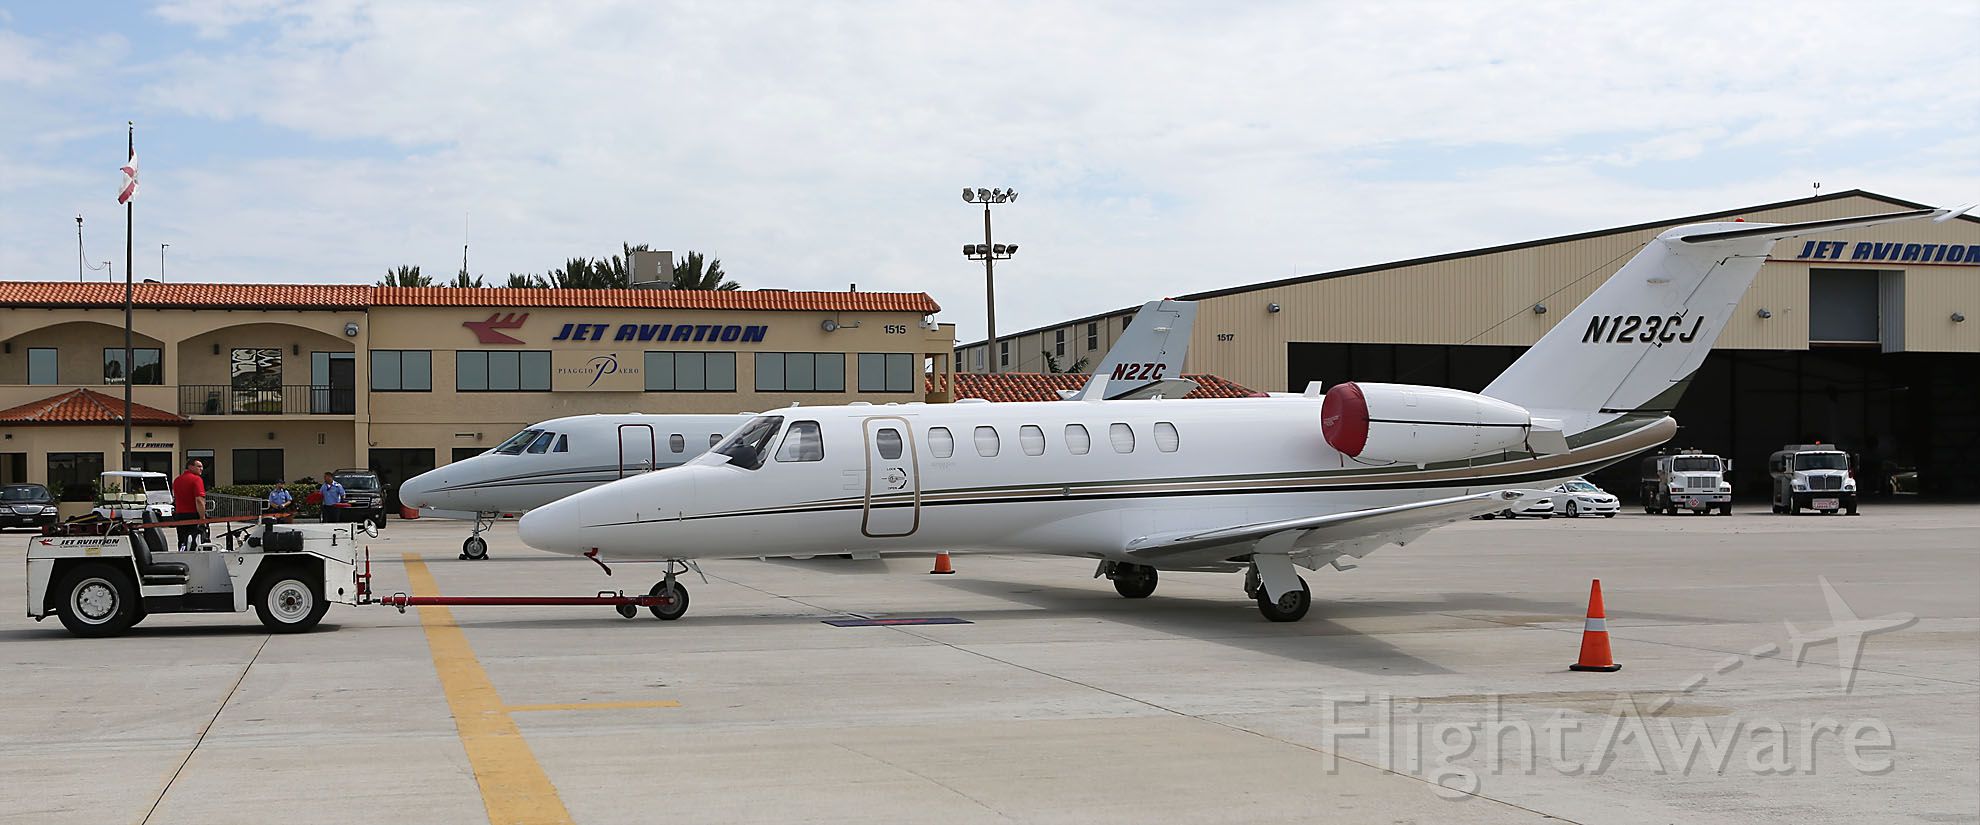 Cessna Citation CJ3 (N123CJ) - Great image of Cessna CJ at Jet Aviation ay KPBI - did not lend itself to 6 x 4 to retain atmosphere